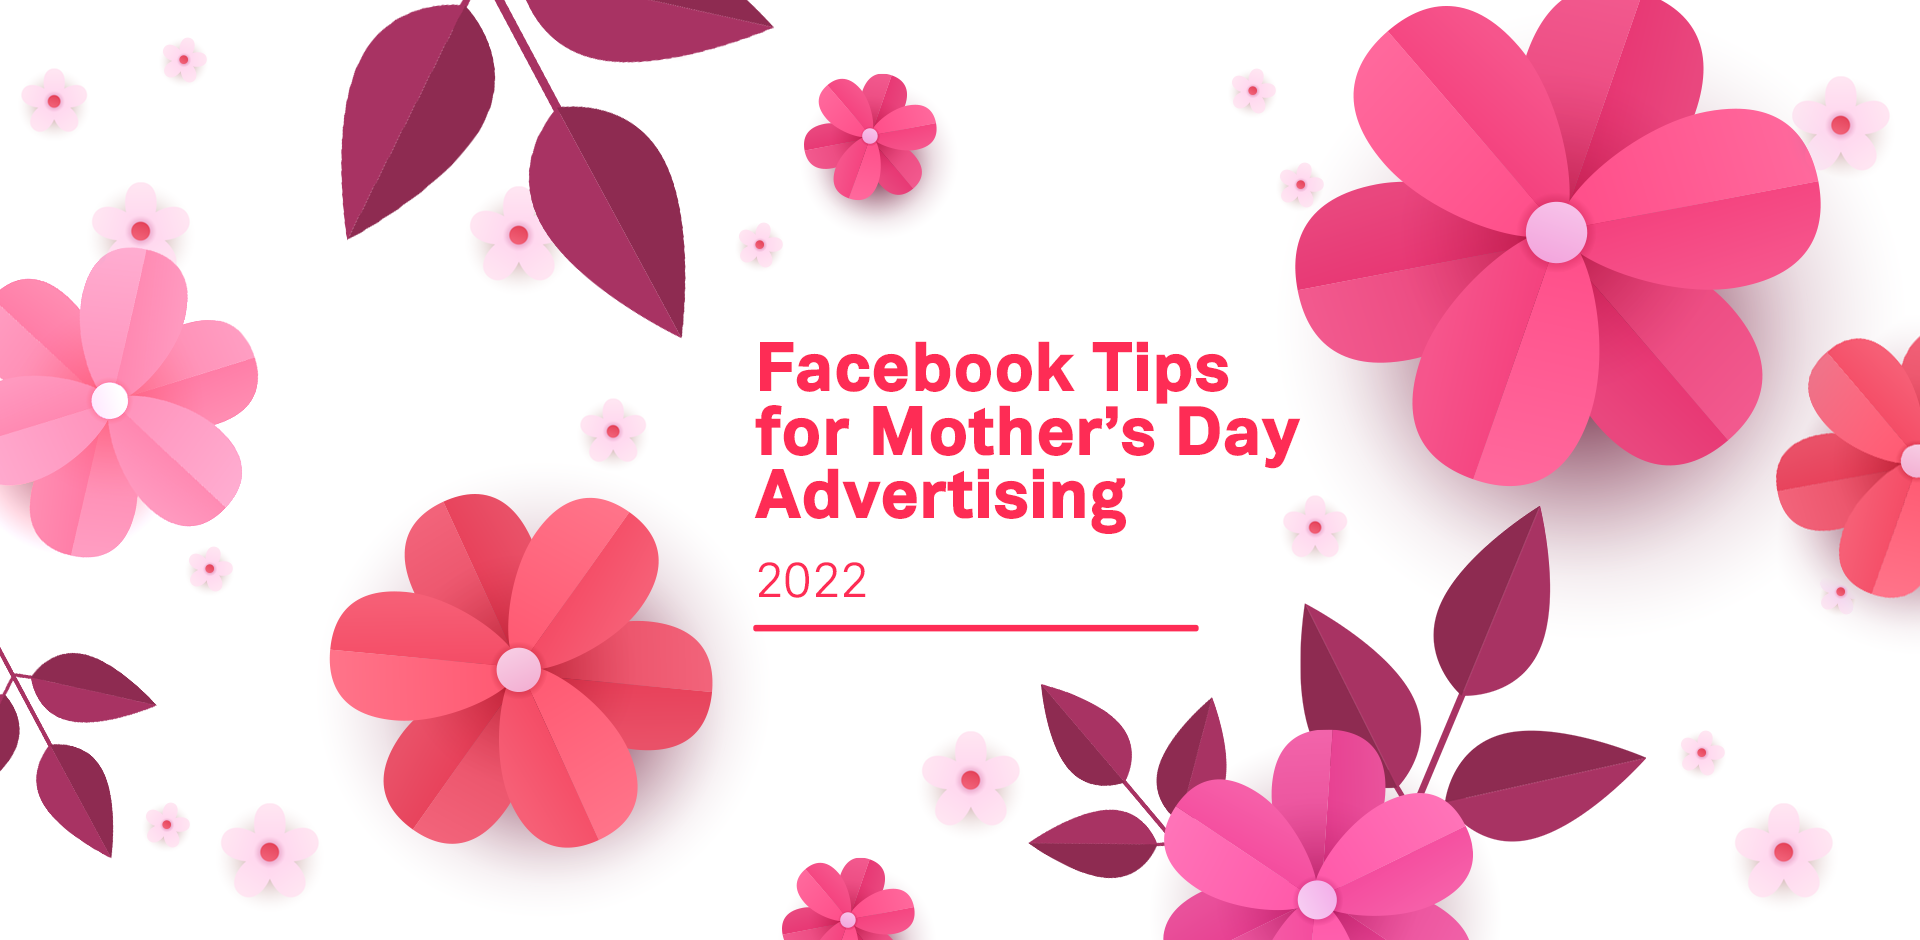 Facebook Tips for Mother’s Day Advertising 2022